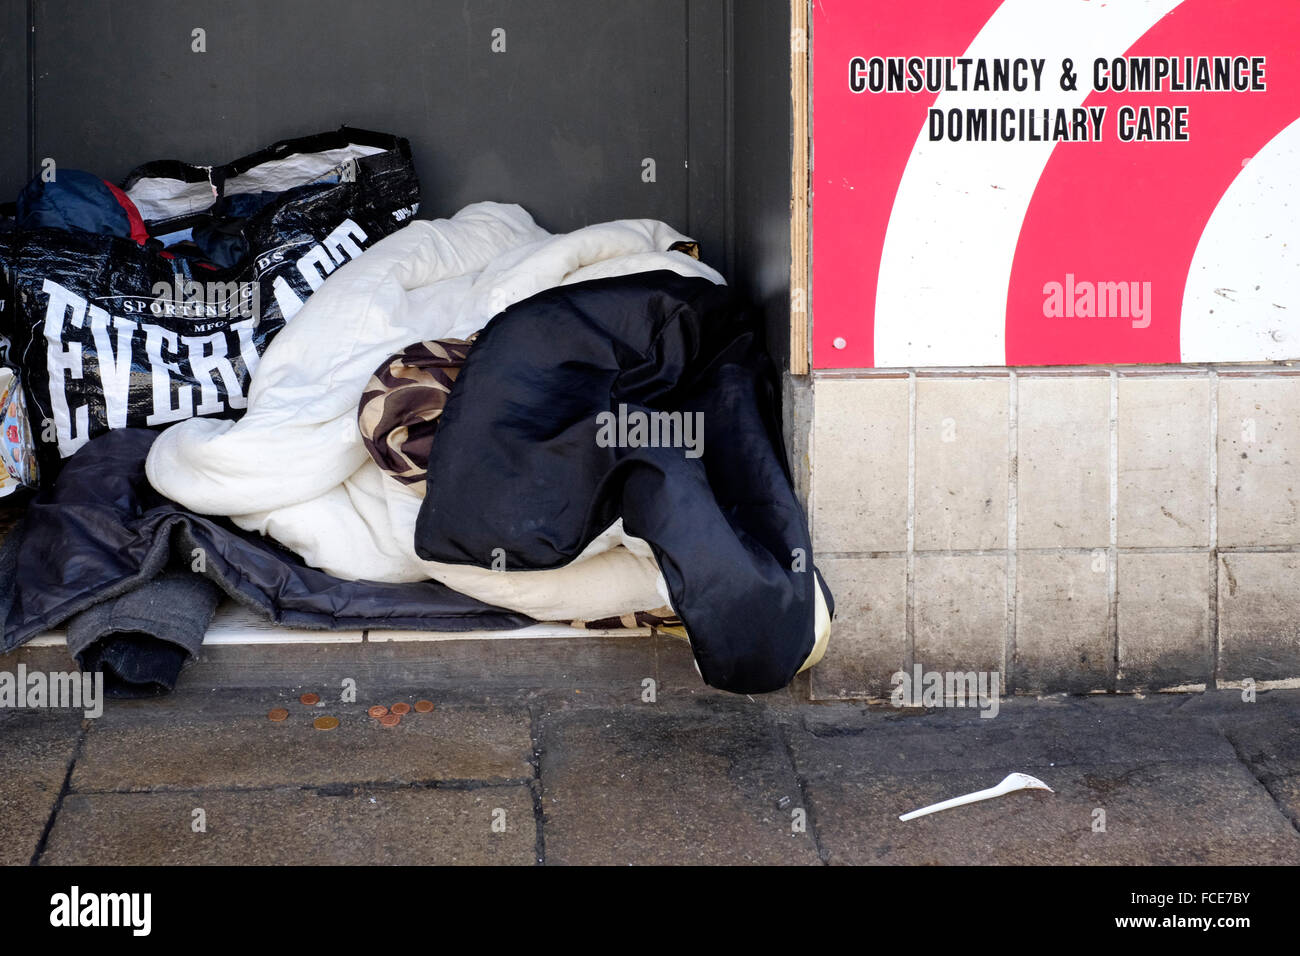 sleeping bags and blankets of homeless people stake out there patch in an empty closed shop doorway england uk Stock Photo